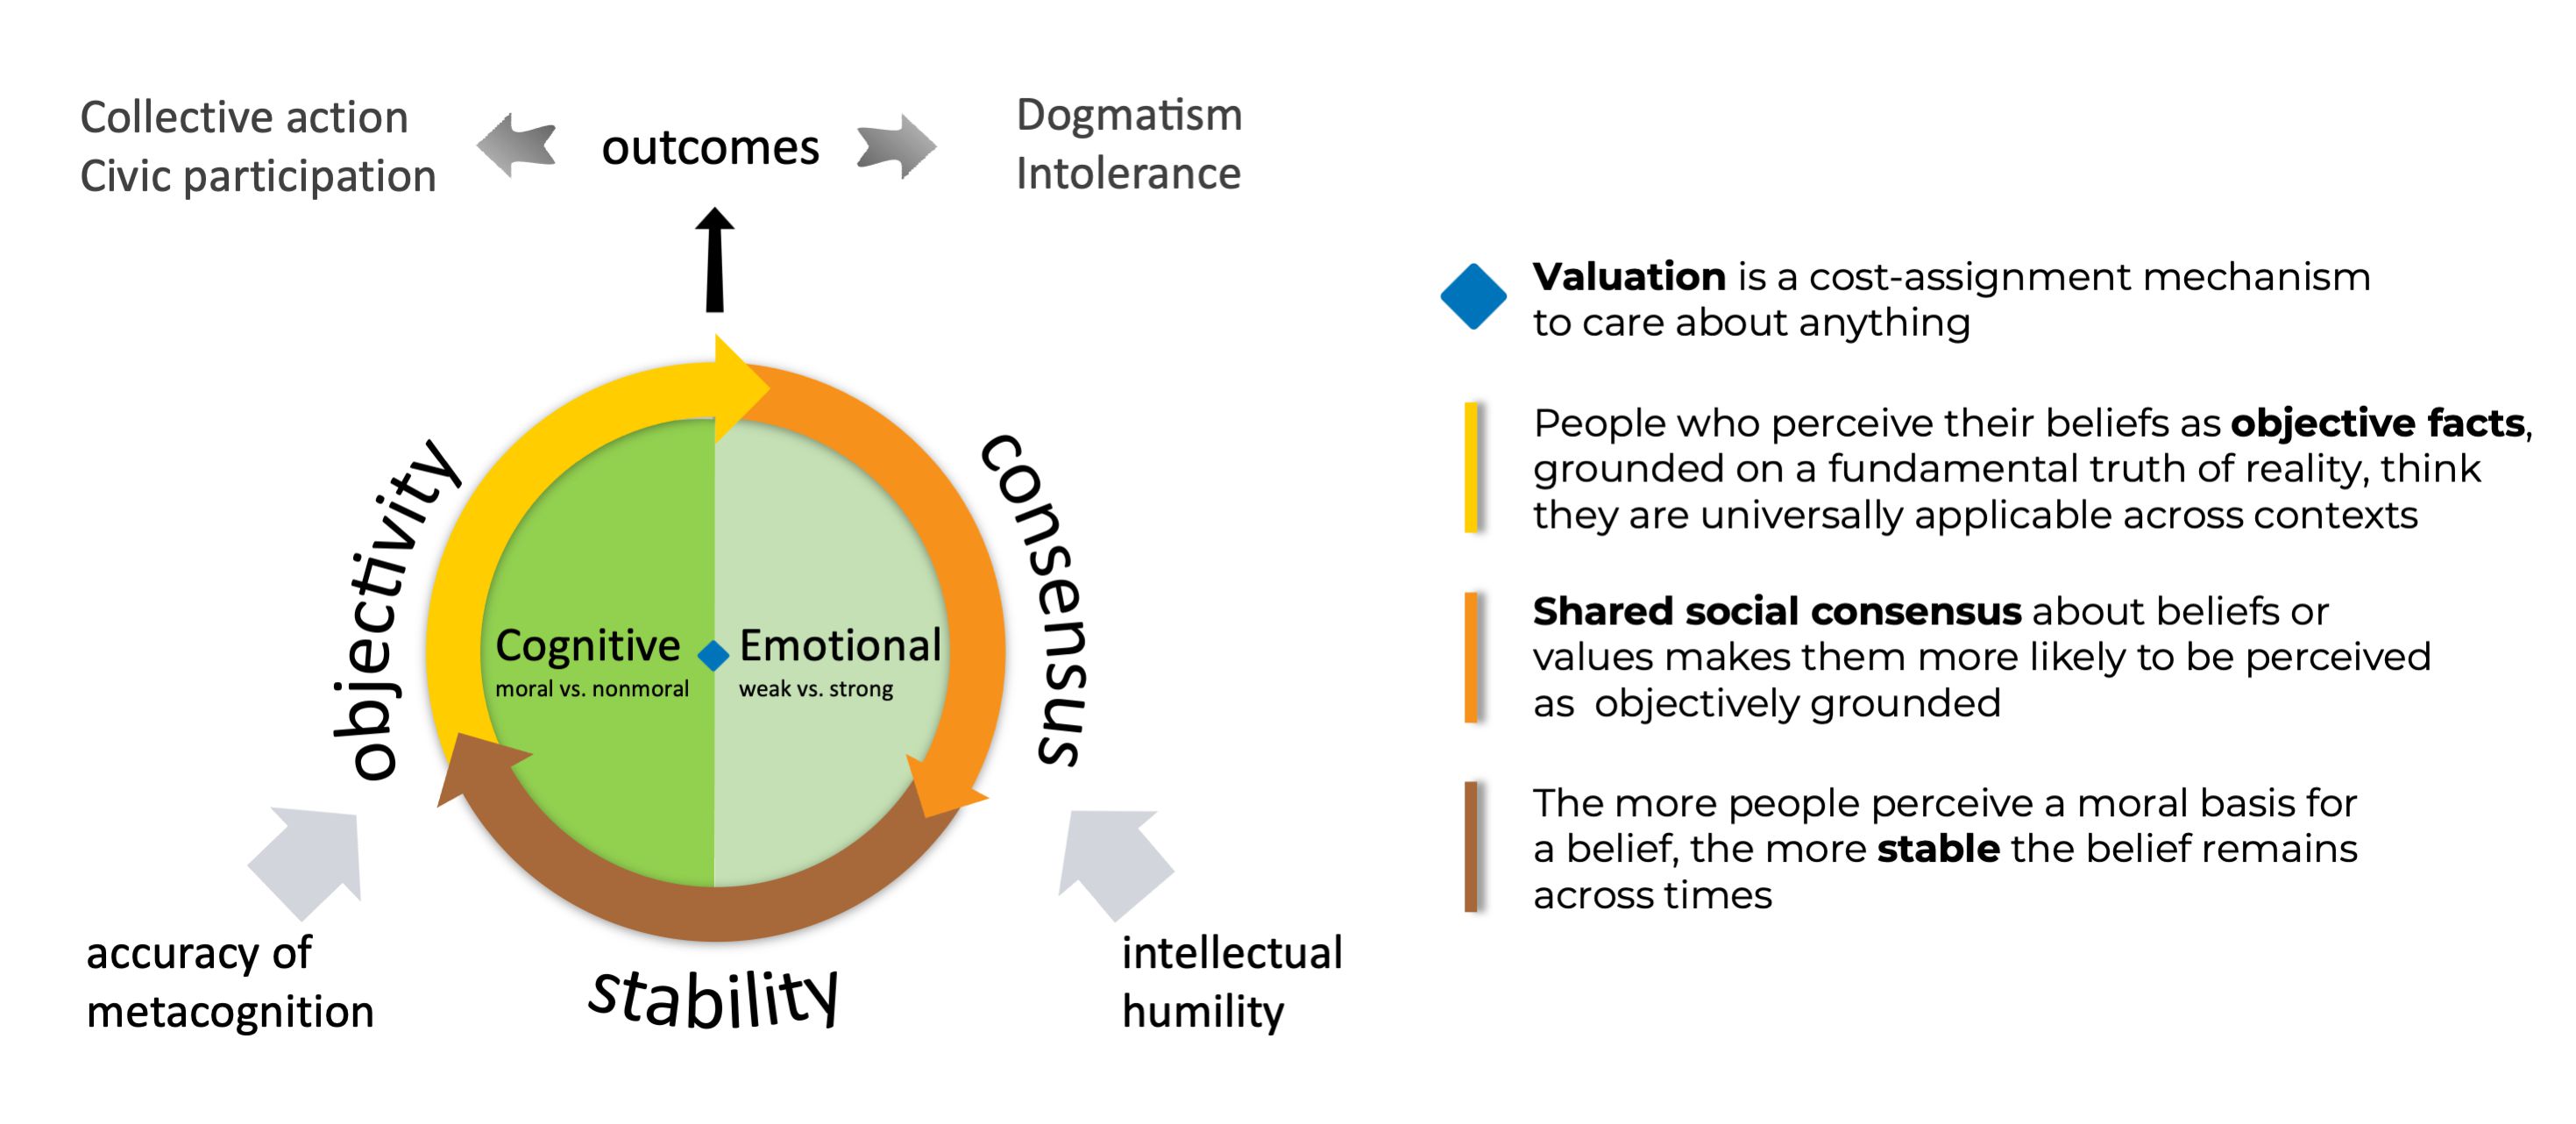 Figure 3: Functional architecture of moral conviction. This nested model characterizes the components (cognitive, emotional, valuation) of moral conviction, which are flexibly reinforced by several characteristics (objectivity, stability & social consensus). Values are the powerhouse of moral convictions. They exert a motivational force that varies in direction and intensity directing behavior toward desirable outcomes. Moral convictions motivate behavior (outcomes) and affect how people act in predictable ways. Certainty –the confidence people have in their beliefs–is deeply influenced by several social factors including consensus, and not necessarily by objective facts. Strong and dogmatic opinions may be the consequence of a cognitive style that includes lower metacognitive sensitivity, the extent to which someone can accurately distinguish their correct from incorrect responses in a variety of domains, including perception, decision-making, and memory. Conversely, intellectual humility, the sense that one’s own knowledge and perspective are limited and thus can be incorrect, reduces polarization by weakening overly dogmatic and morally convicted beliefs.